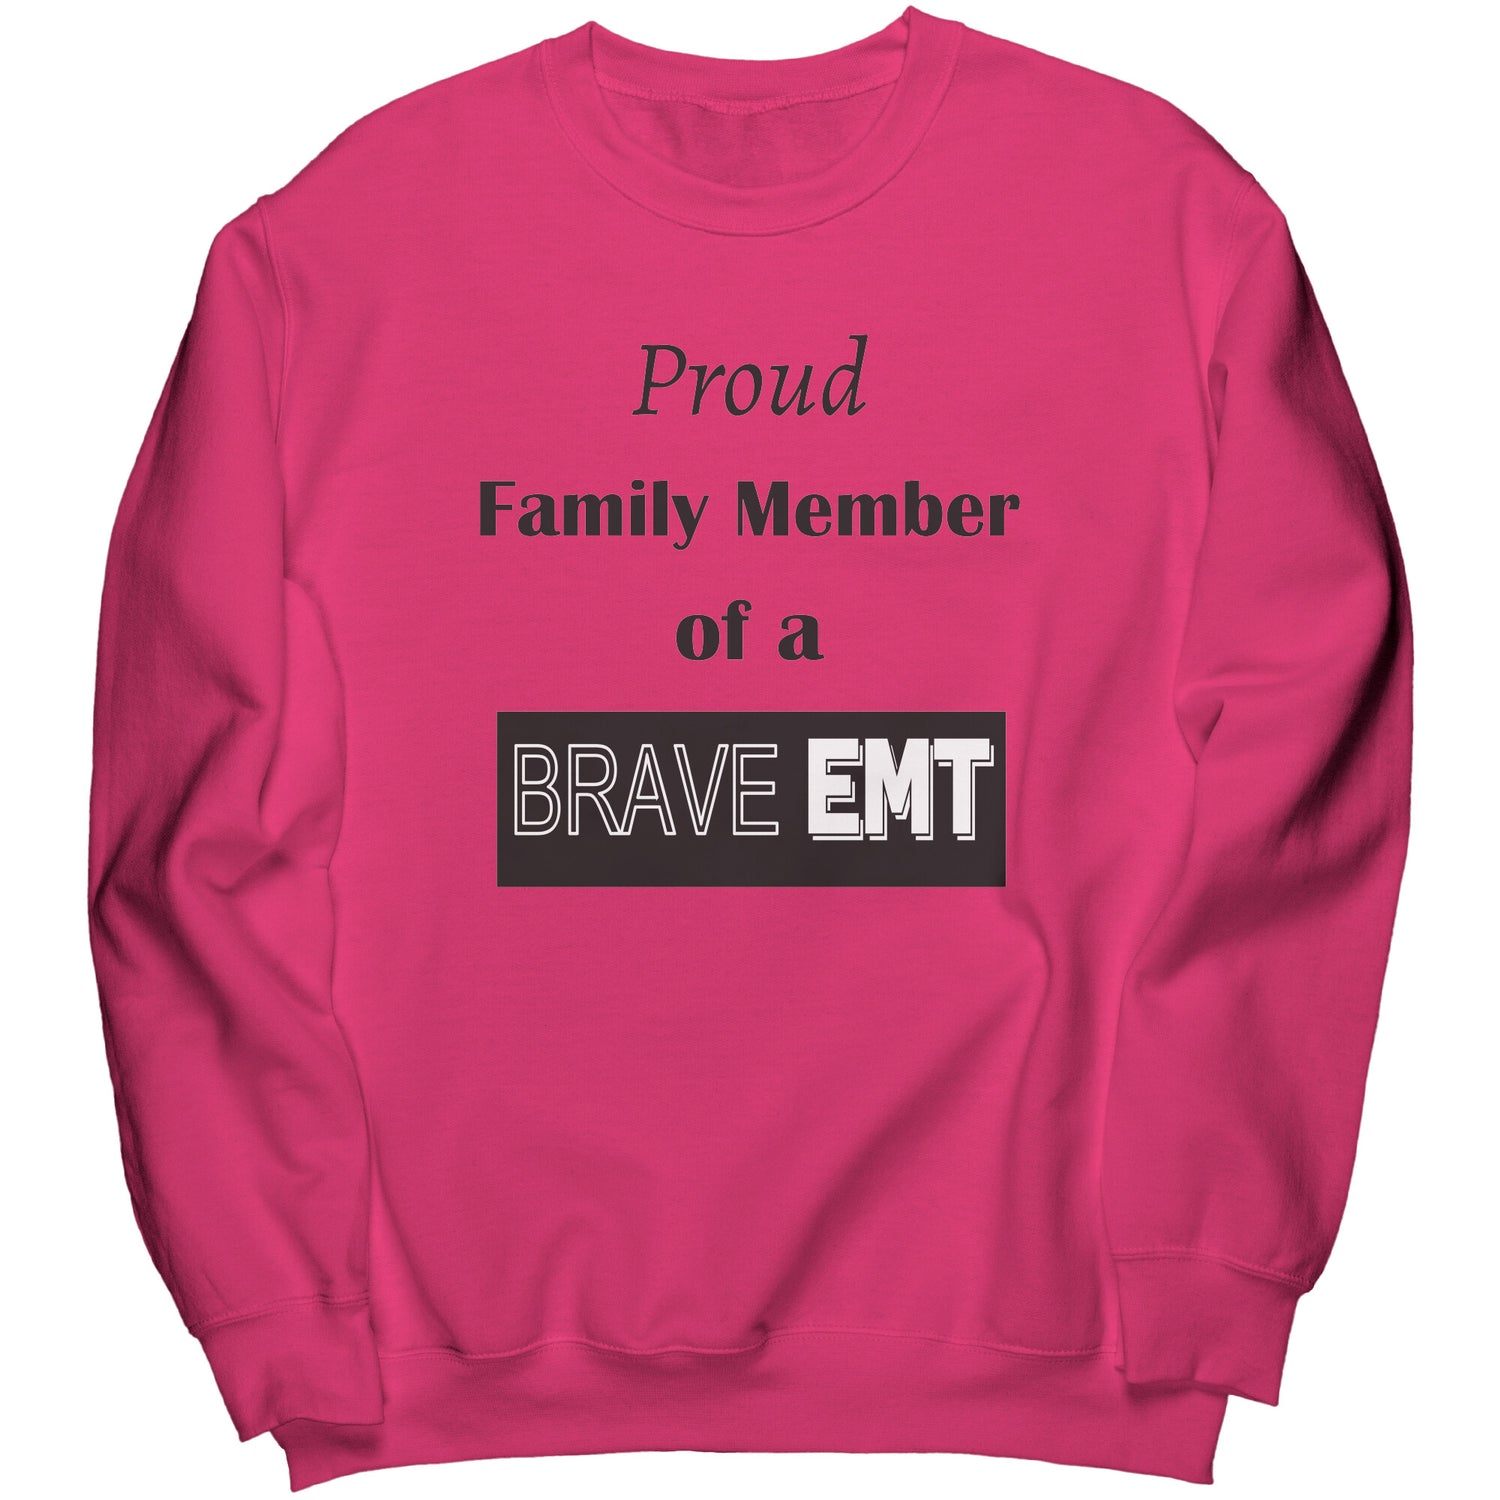 Proud Family Member of a Brave EMT Lettering Sweatshirt - Signs and Seasons Gifts